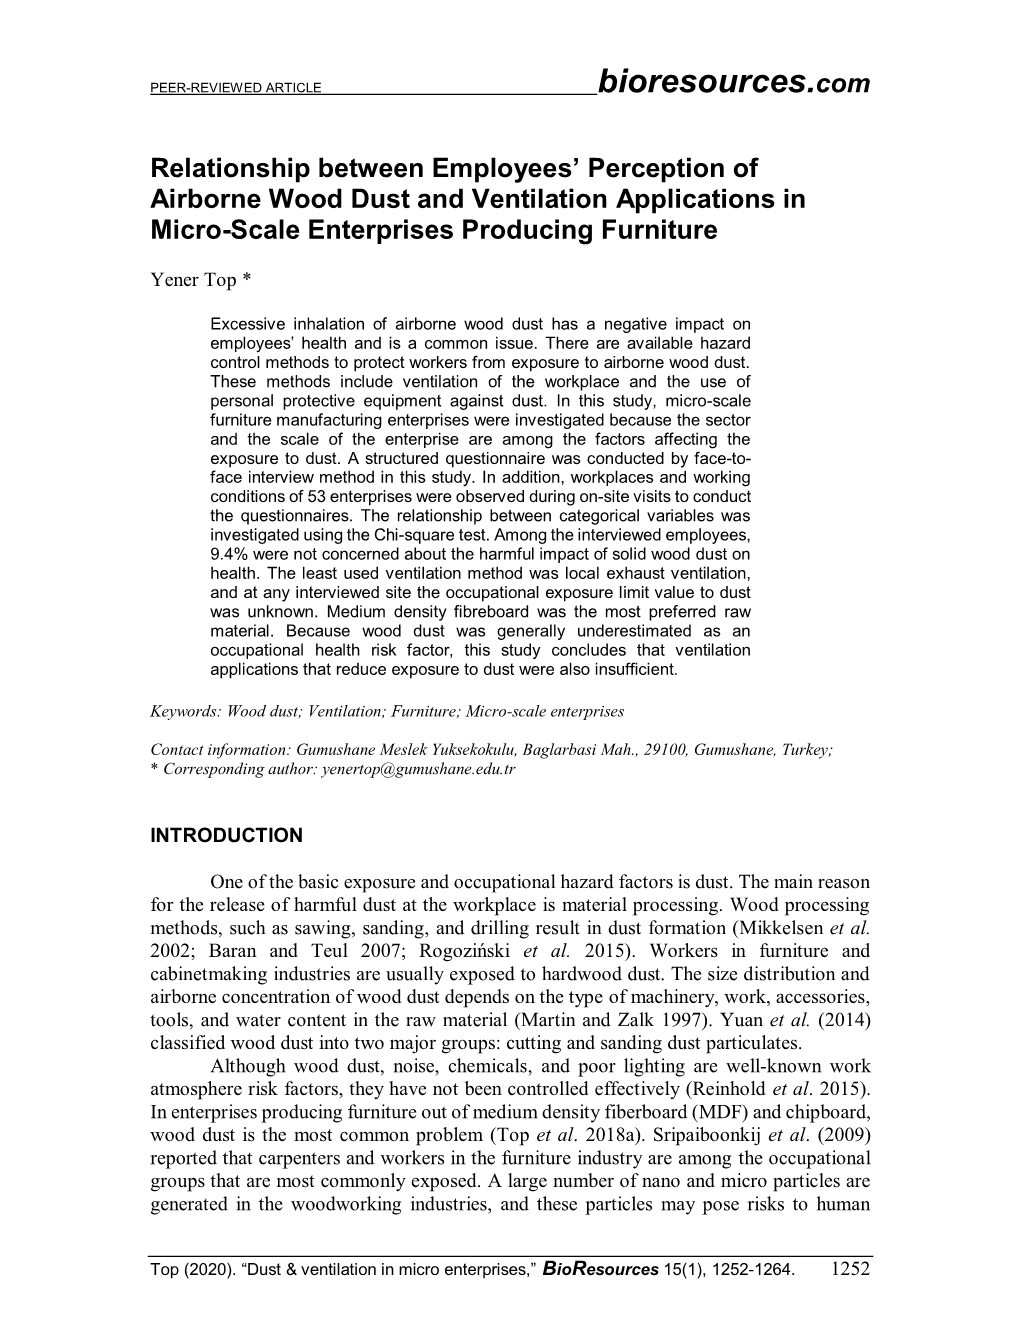 Relationship Between Employees' Perception of Airborne Wood Dust